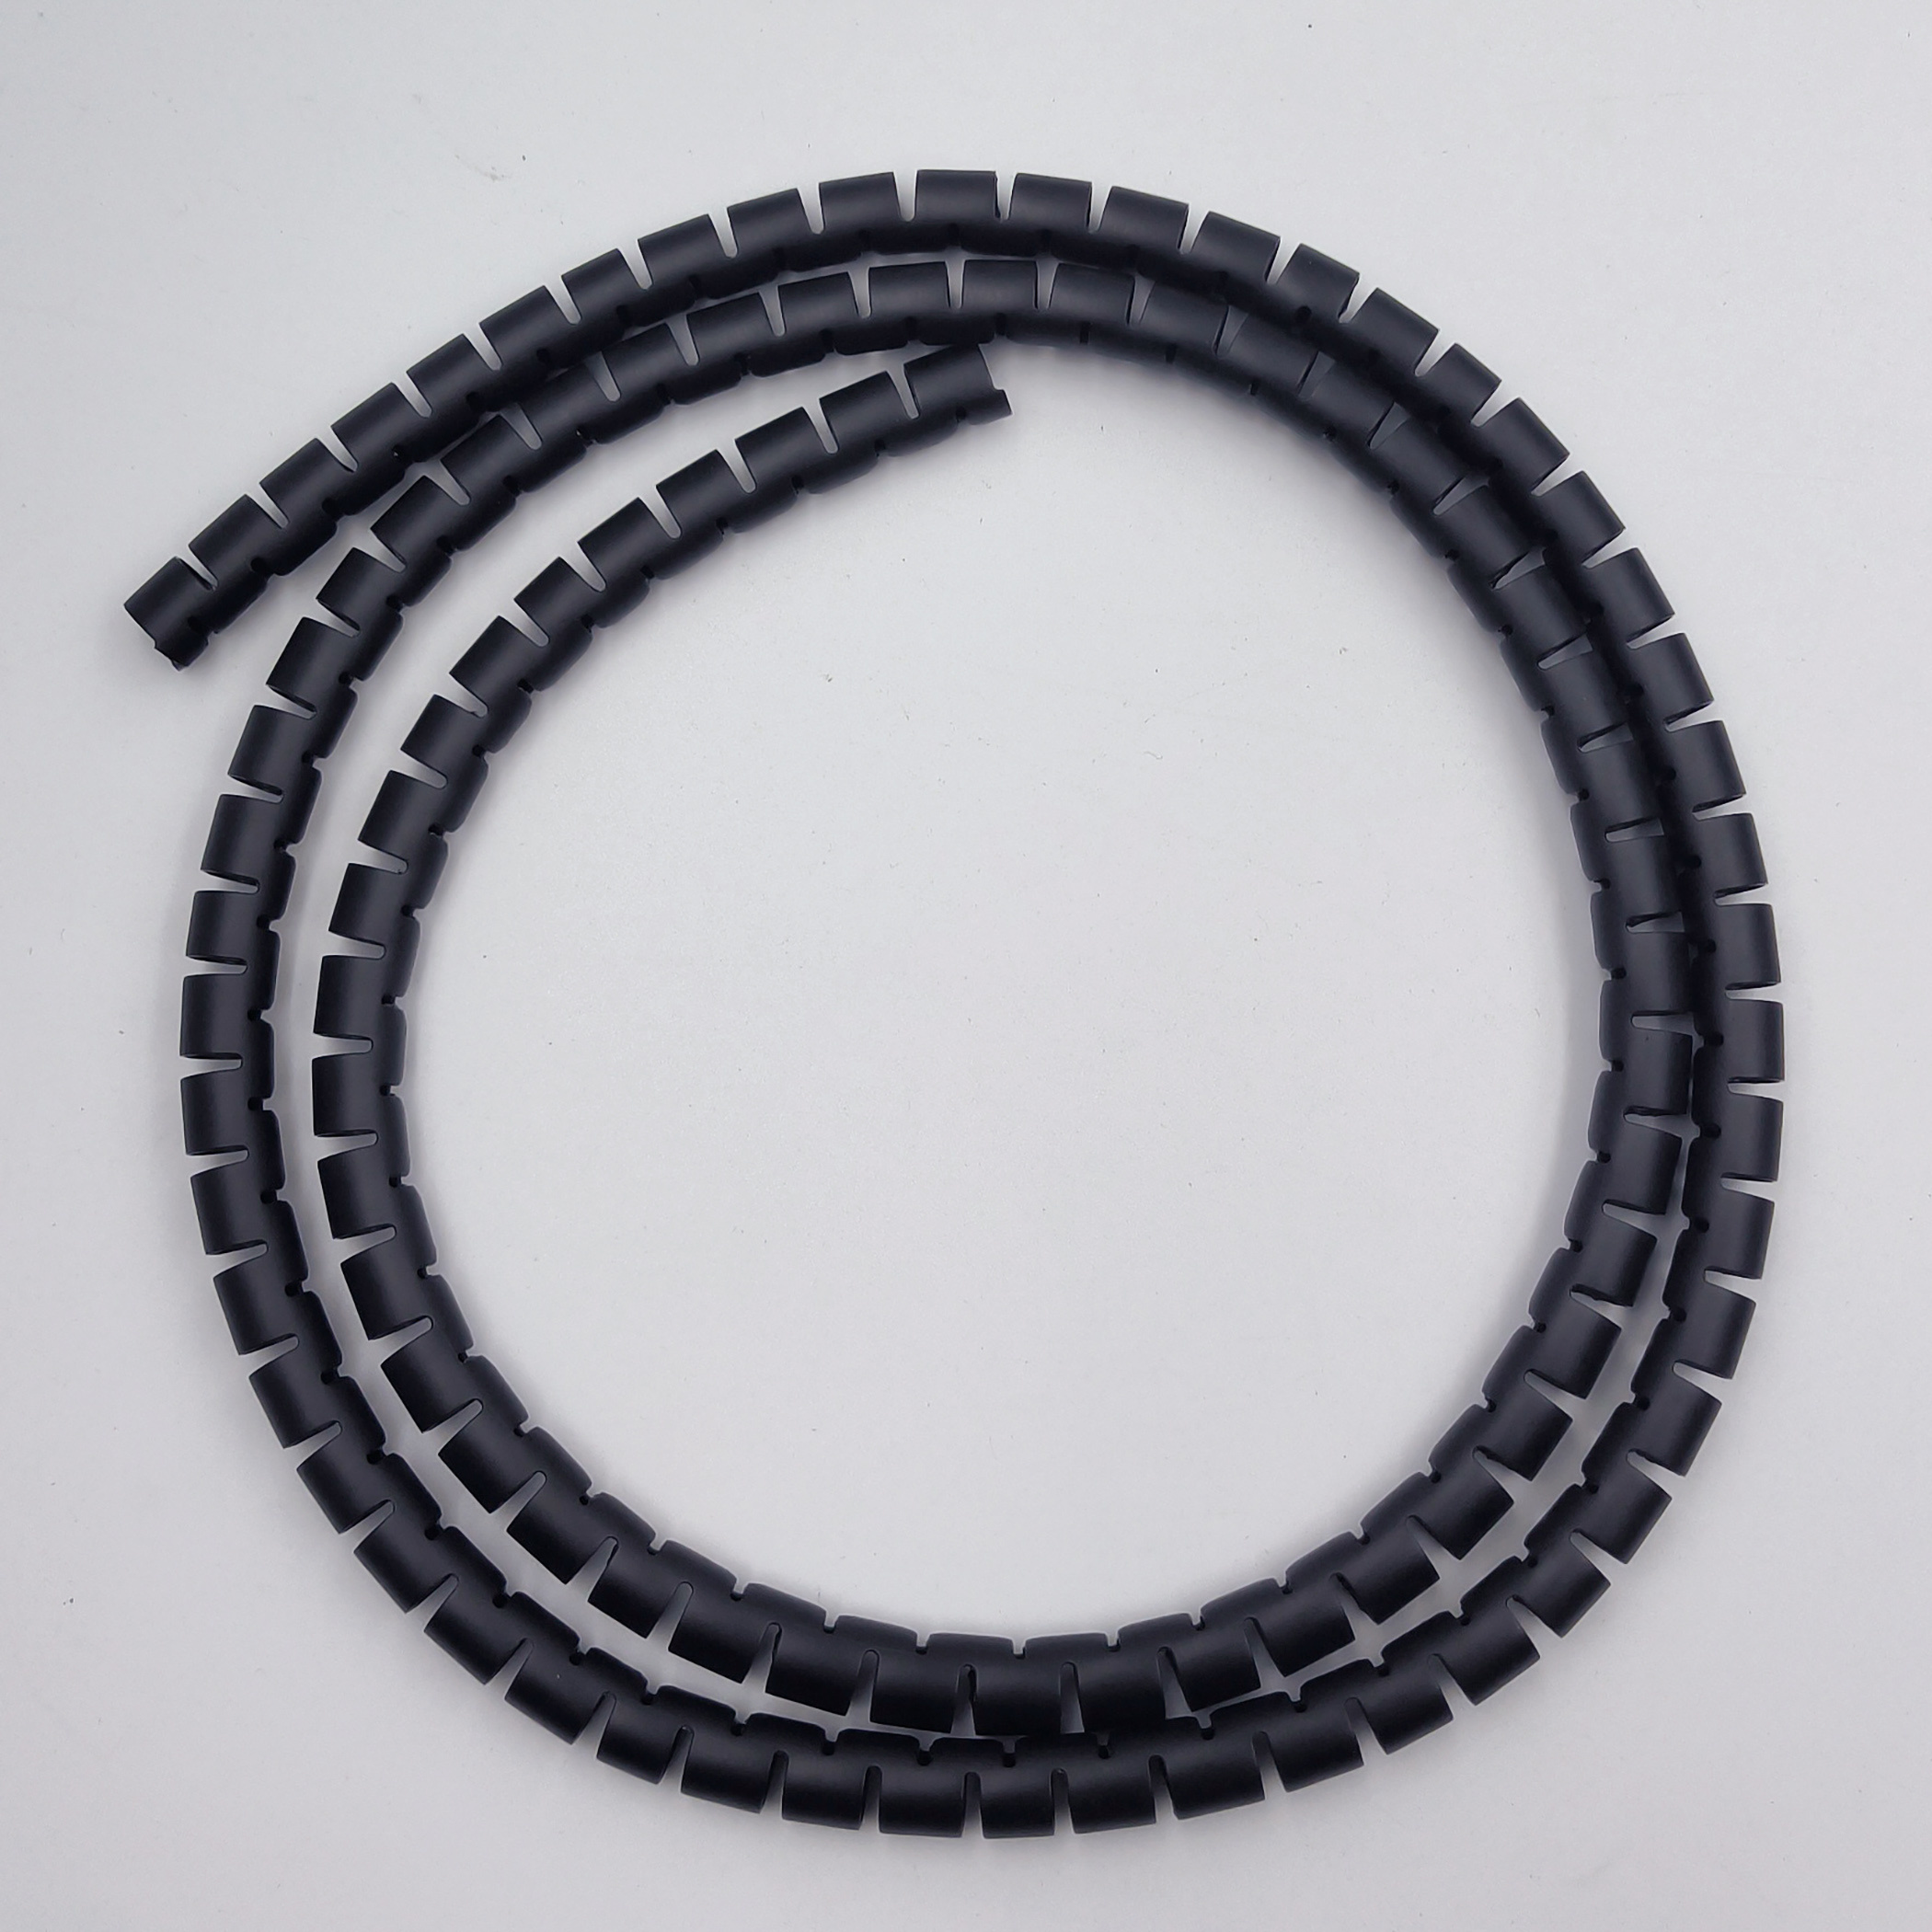 1.5/2M 16/10mm Flexible Spiral Cable Wire Protector Cable